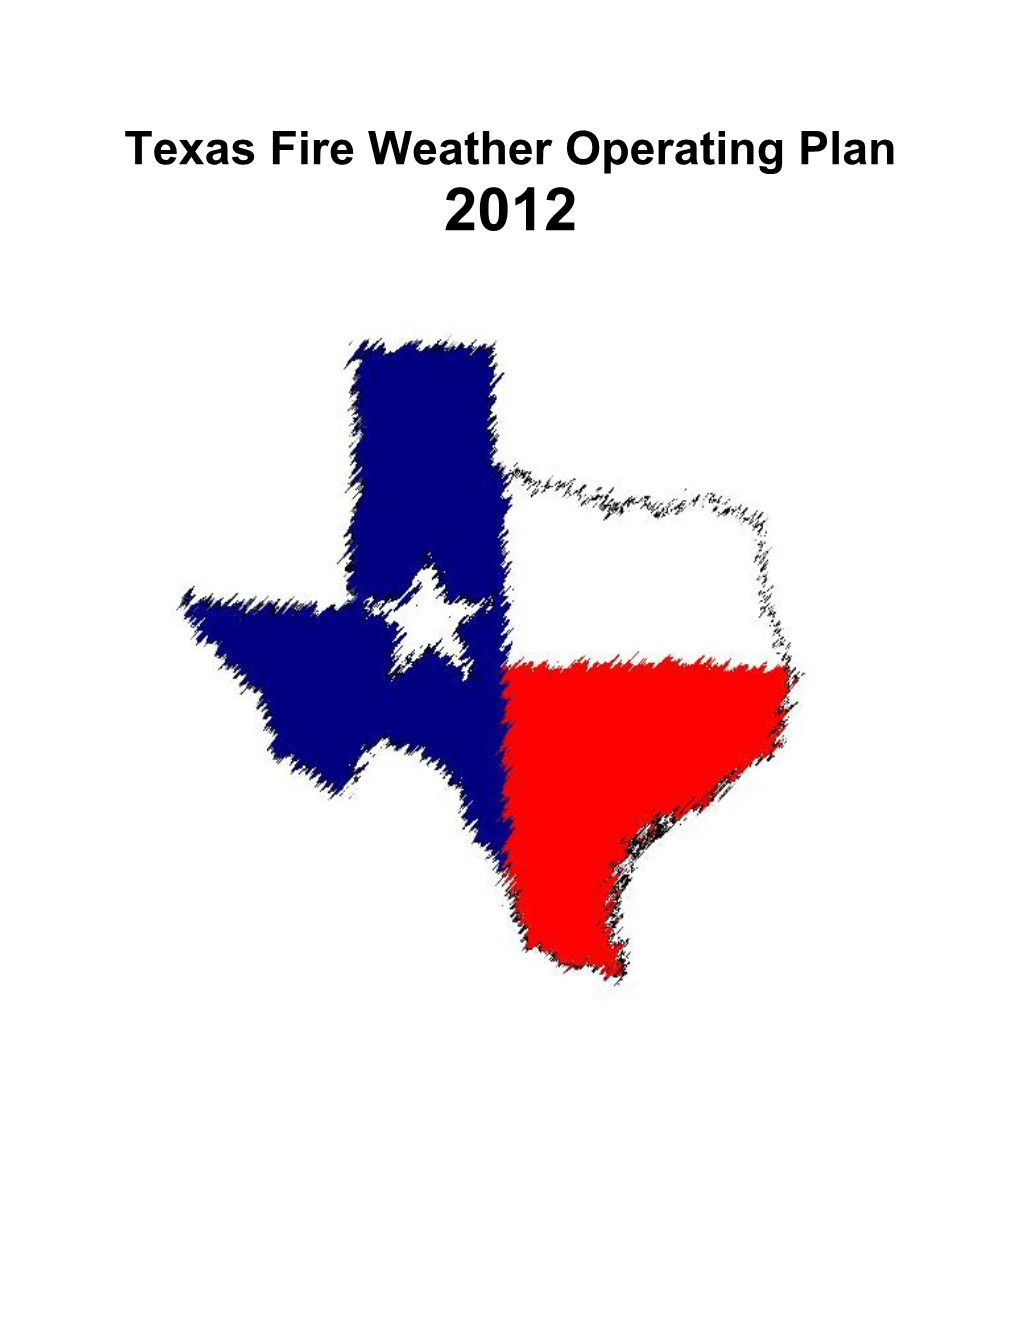 Texas Fire Weather Operating Plan 2012